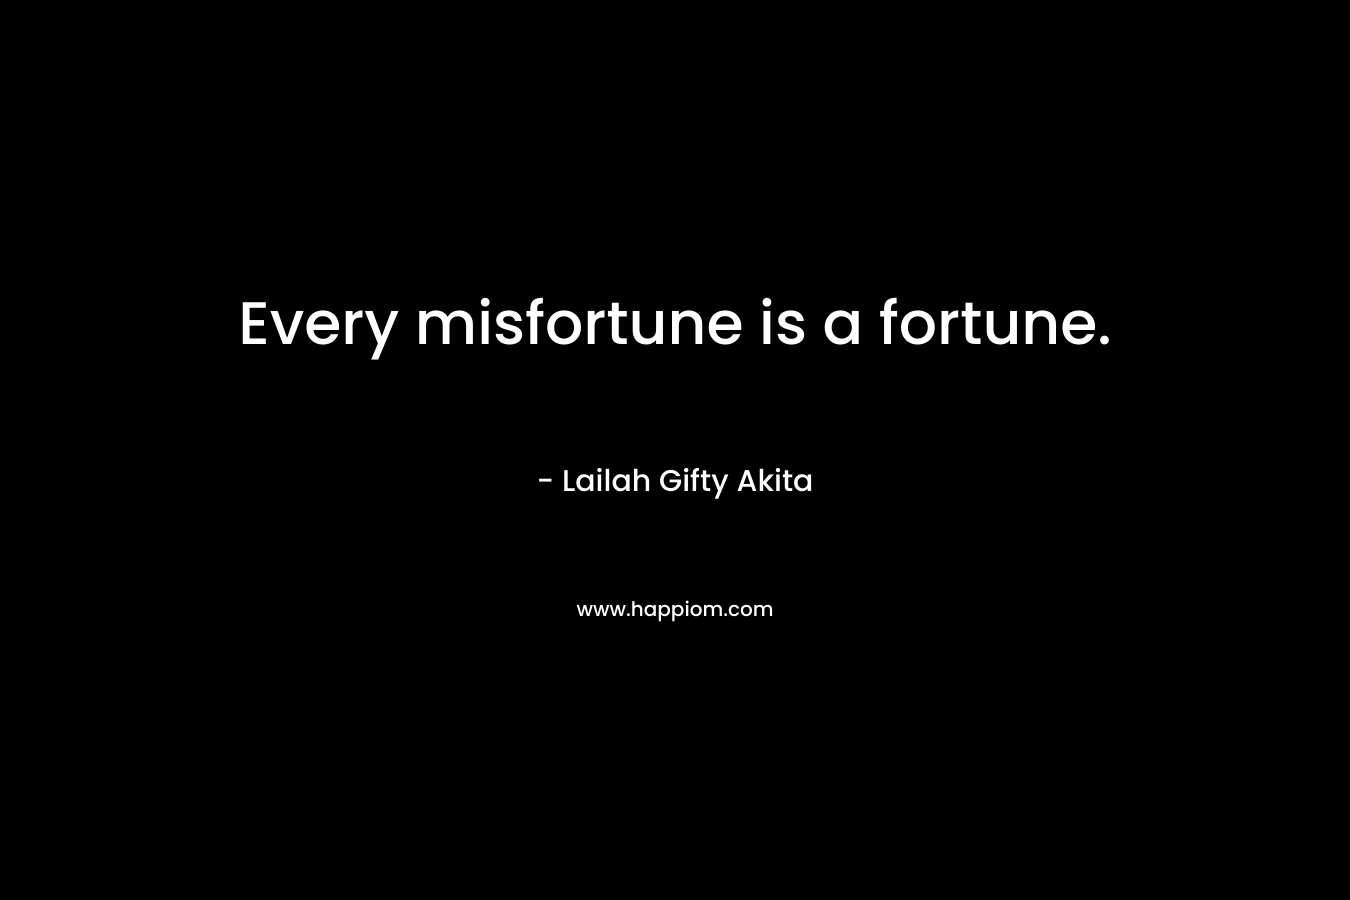 Every misfortune is a fortune. – Lailah Gifty Akita